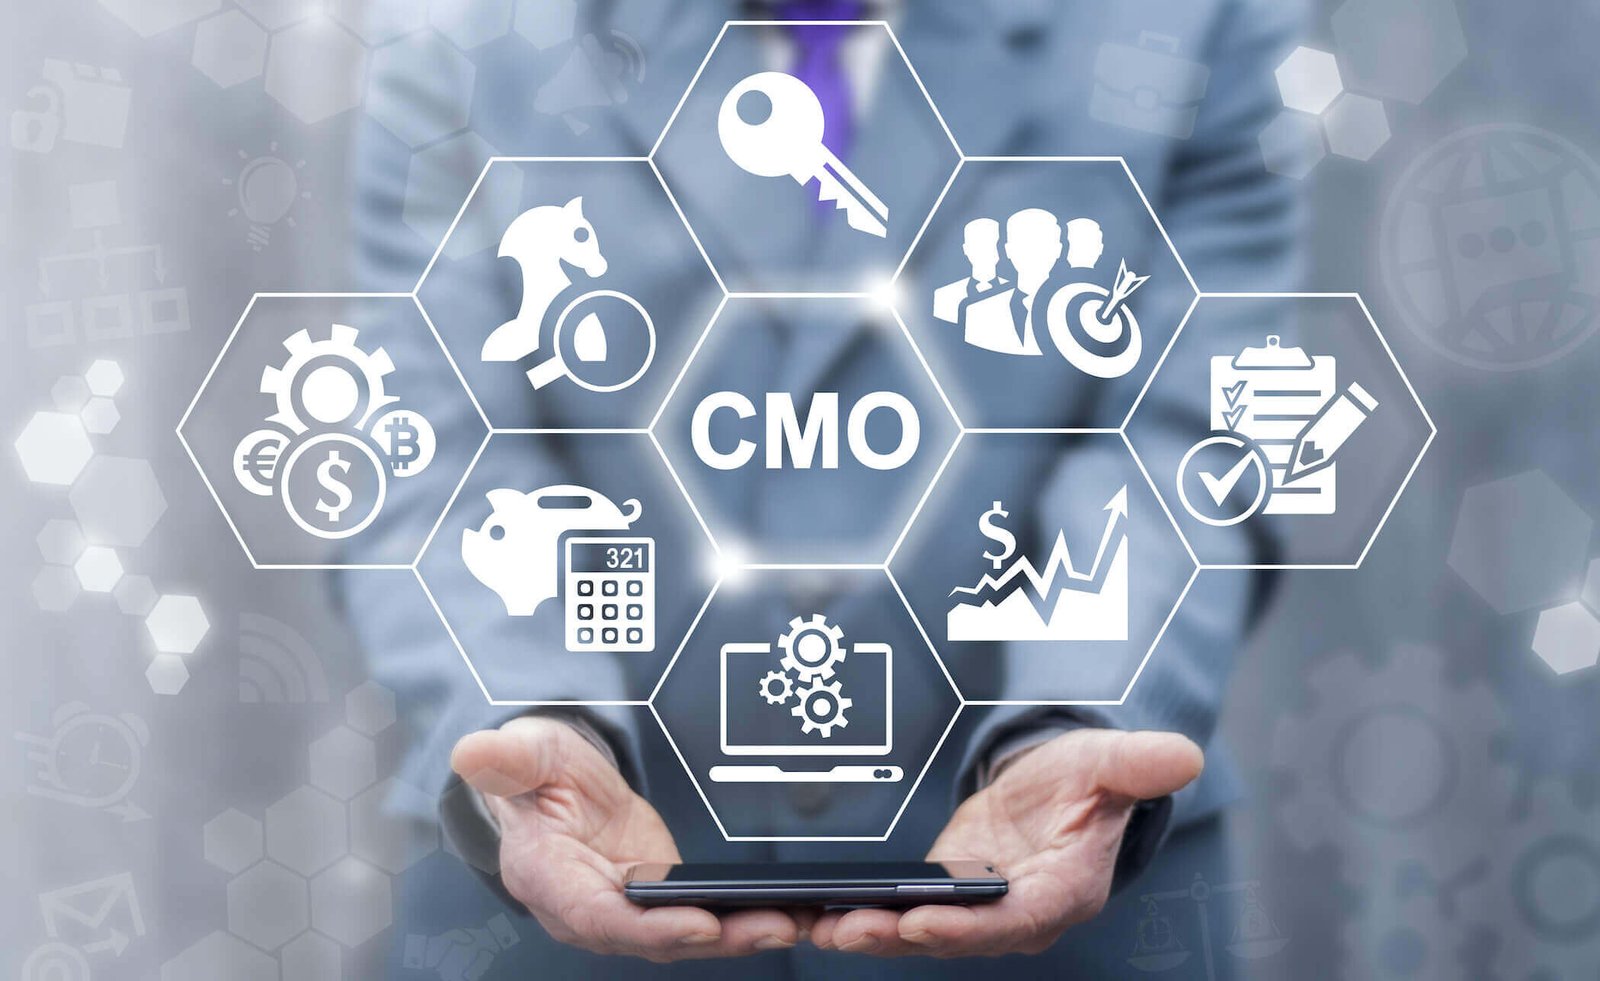 Tech Marketing: How It Affects the Role of the CMO